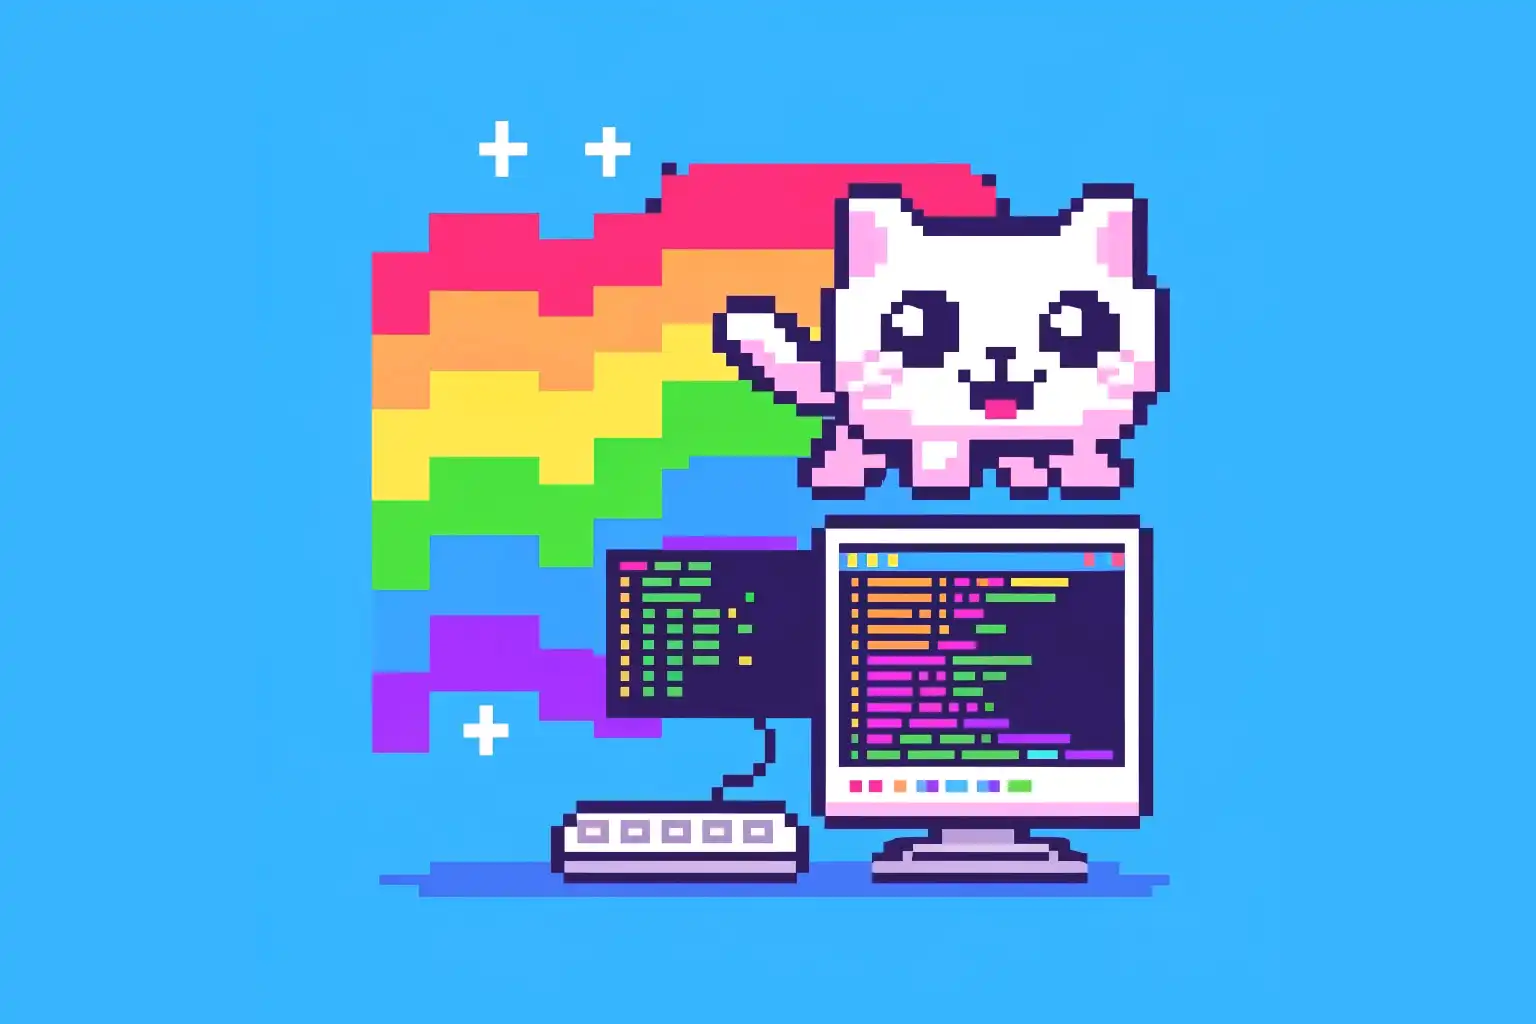 Queering Code landing page view